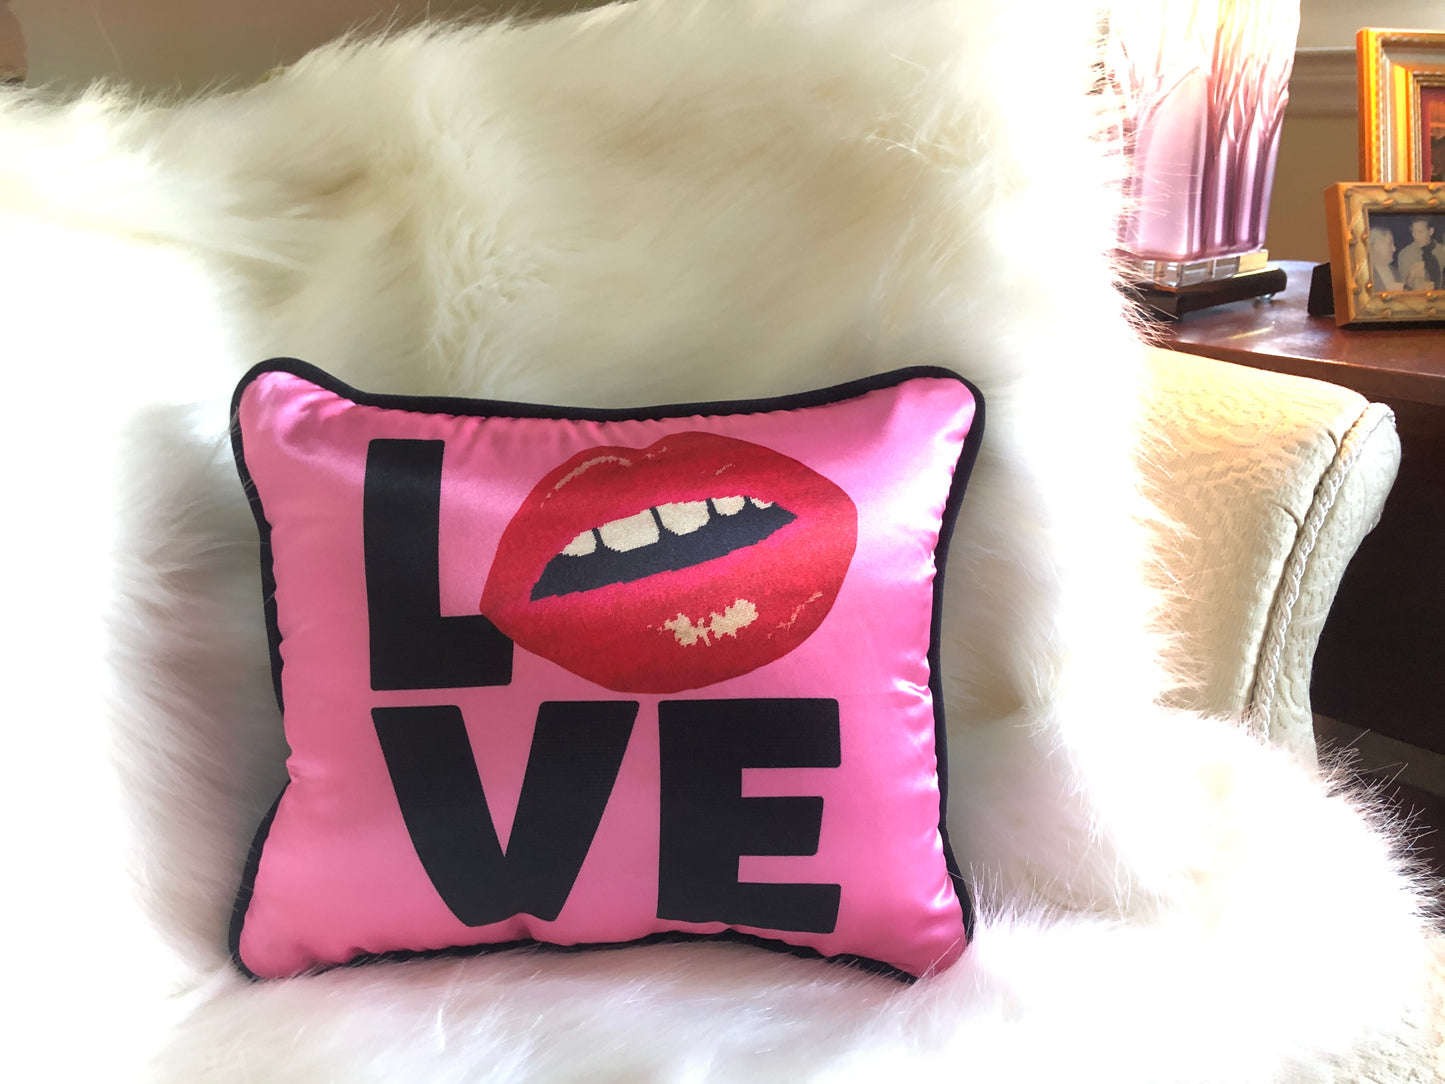 hot pink pillow with blackletters - L, red lips for an O, V & E stacked underneath.  Shown on white faux fur throw.